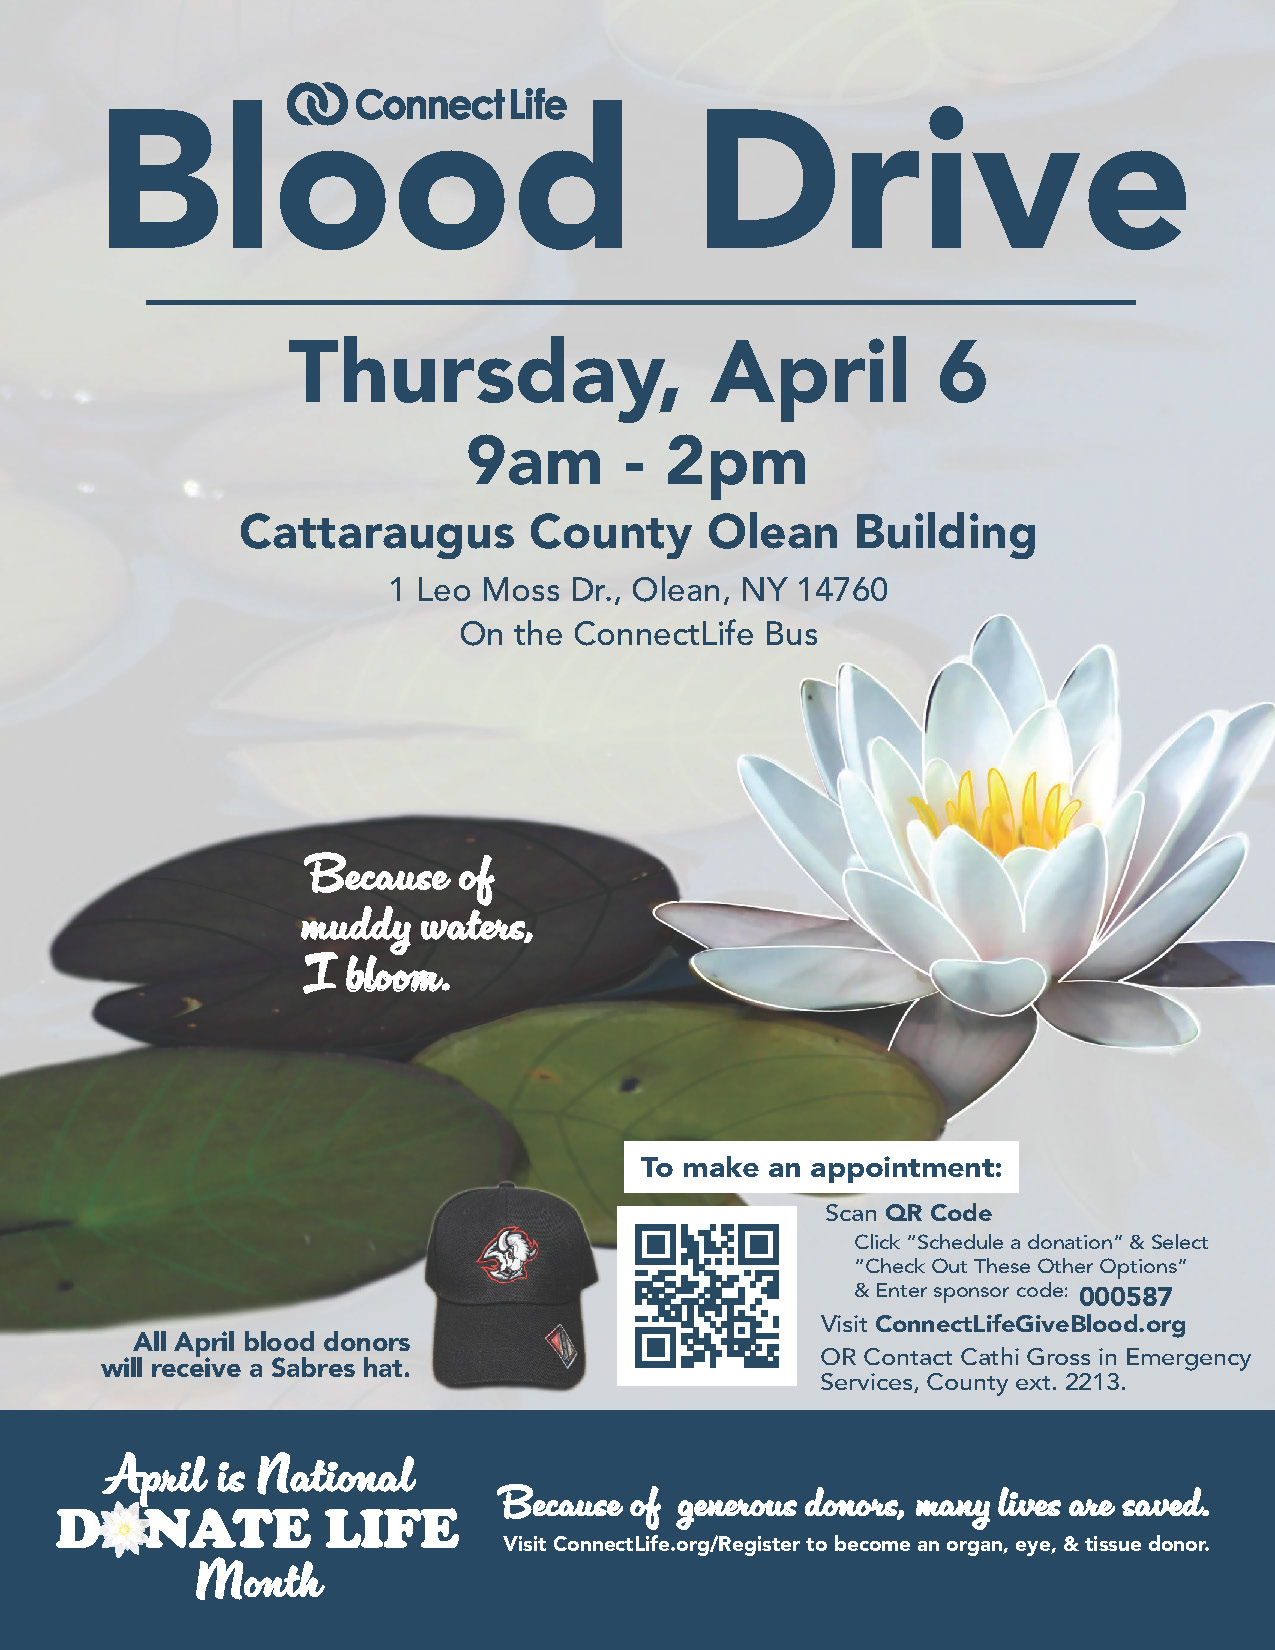 Preview of flyer for Blood Drive on April 6, 2023 at the Cattaraugus County Building in Olean, NY